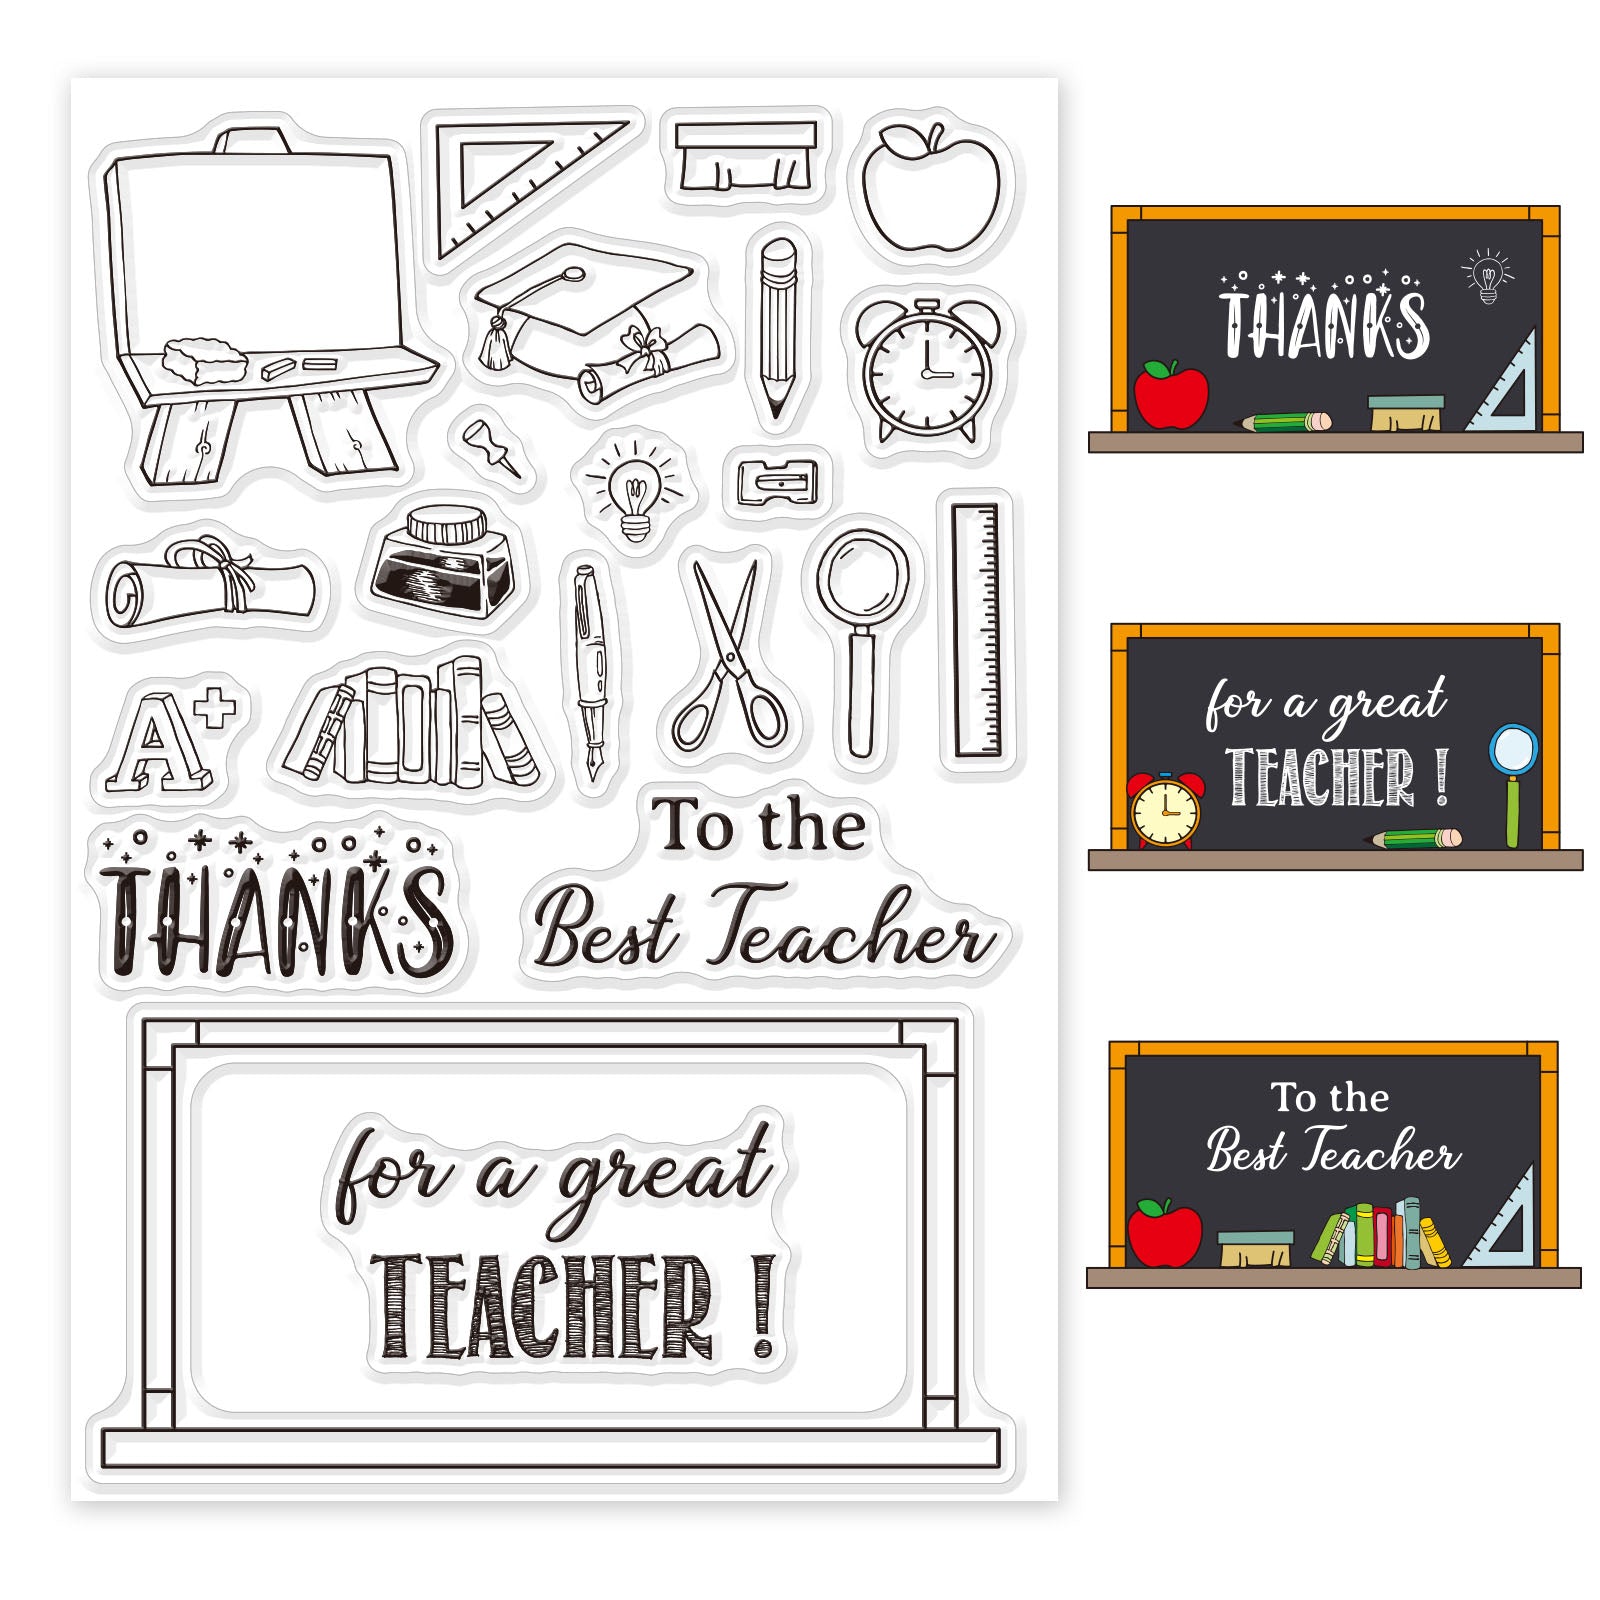 Globleland Teacher's Day, Thanksgiving Teachers, Gifts for Teachers, School, School Supplies Clear Silicone Stamp Seal for Card Making Decoration and DIY Scrapbooking